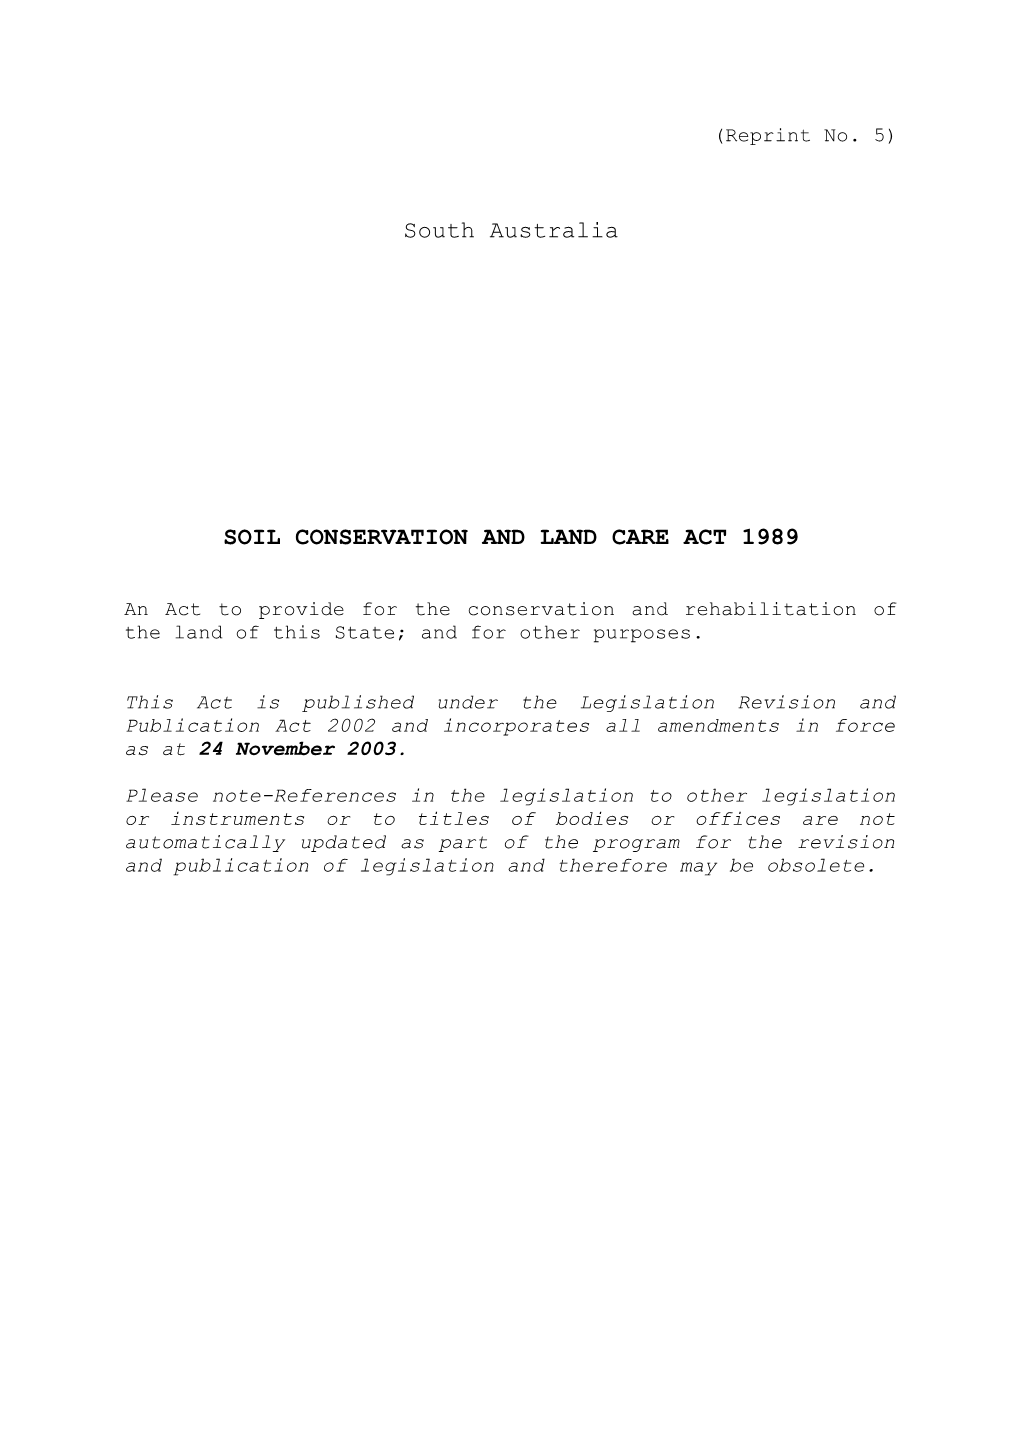 Soil Conservation and Land Care Act 1989